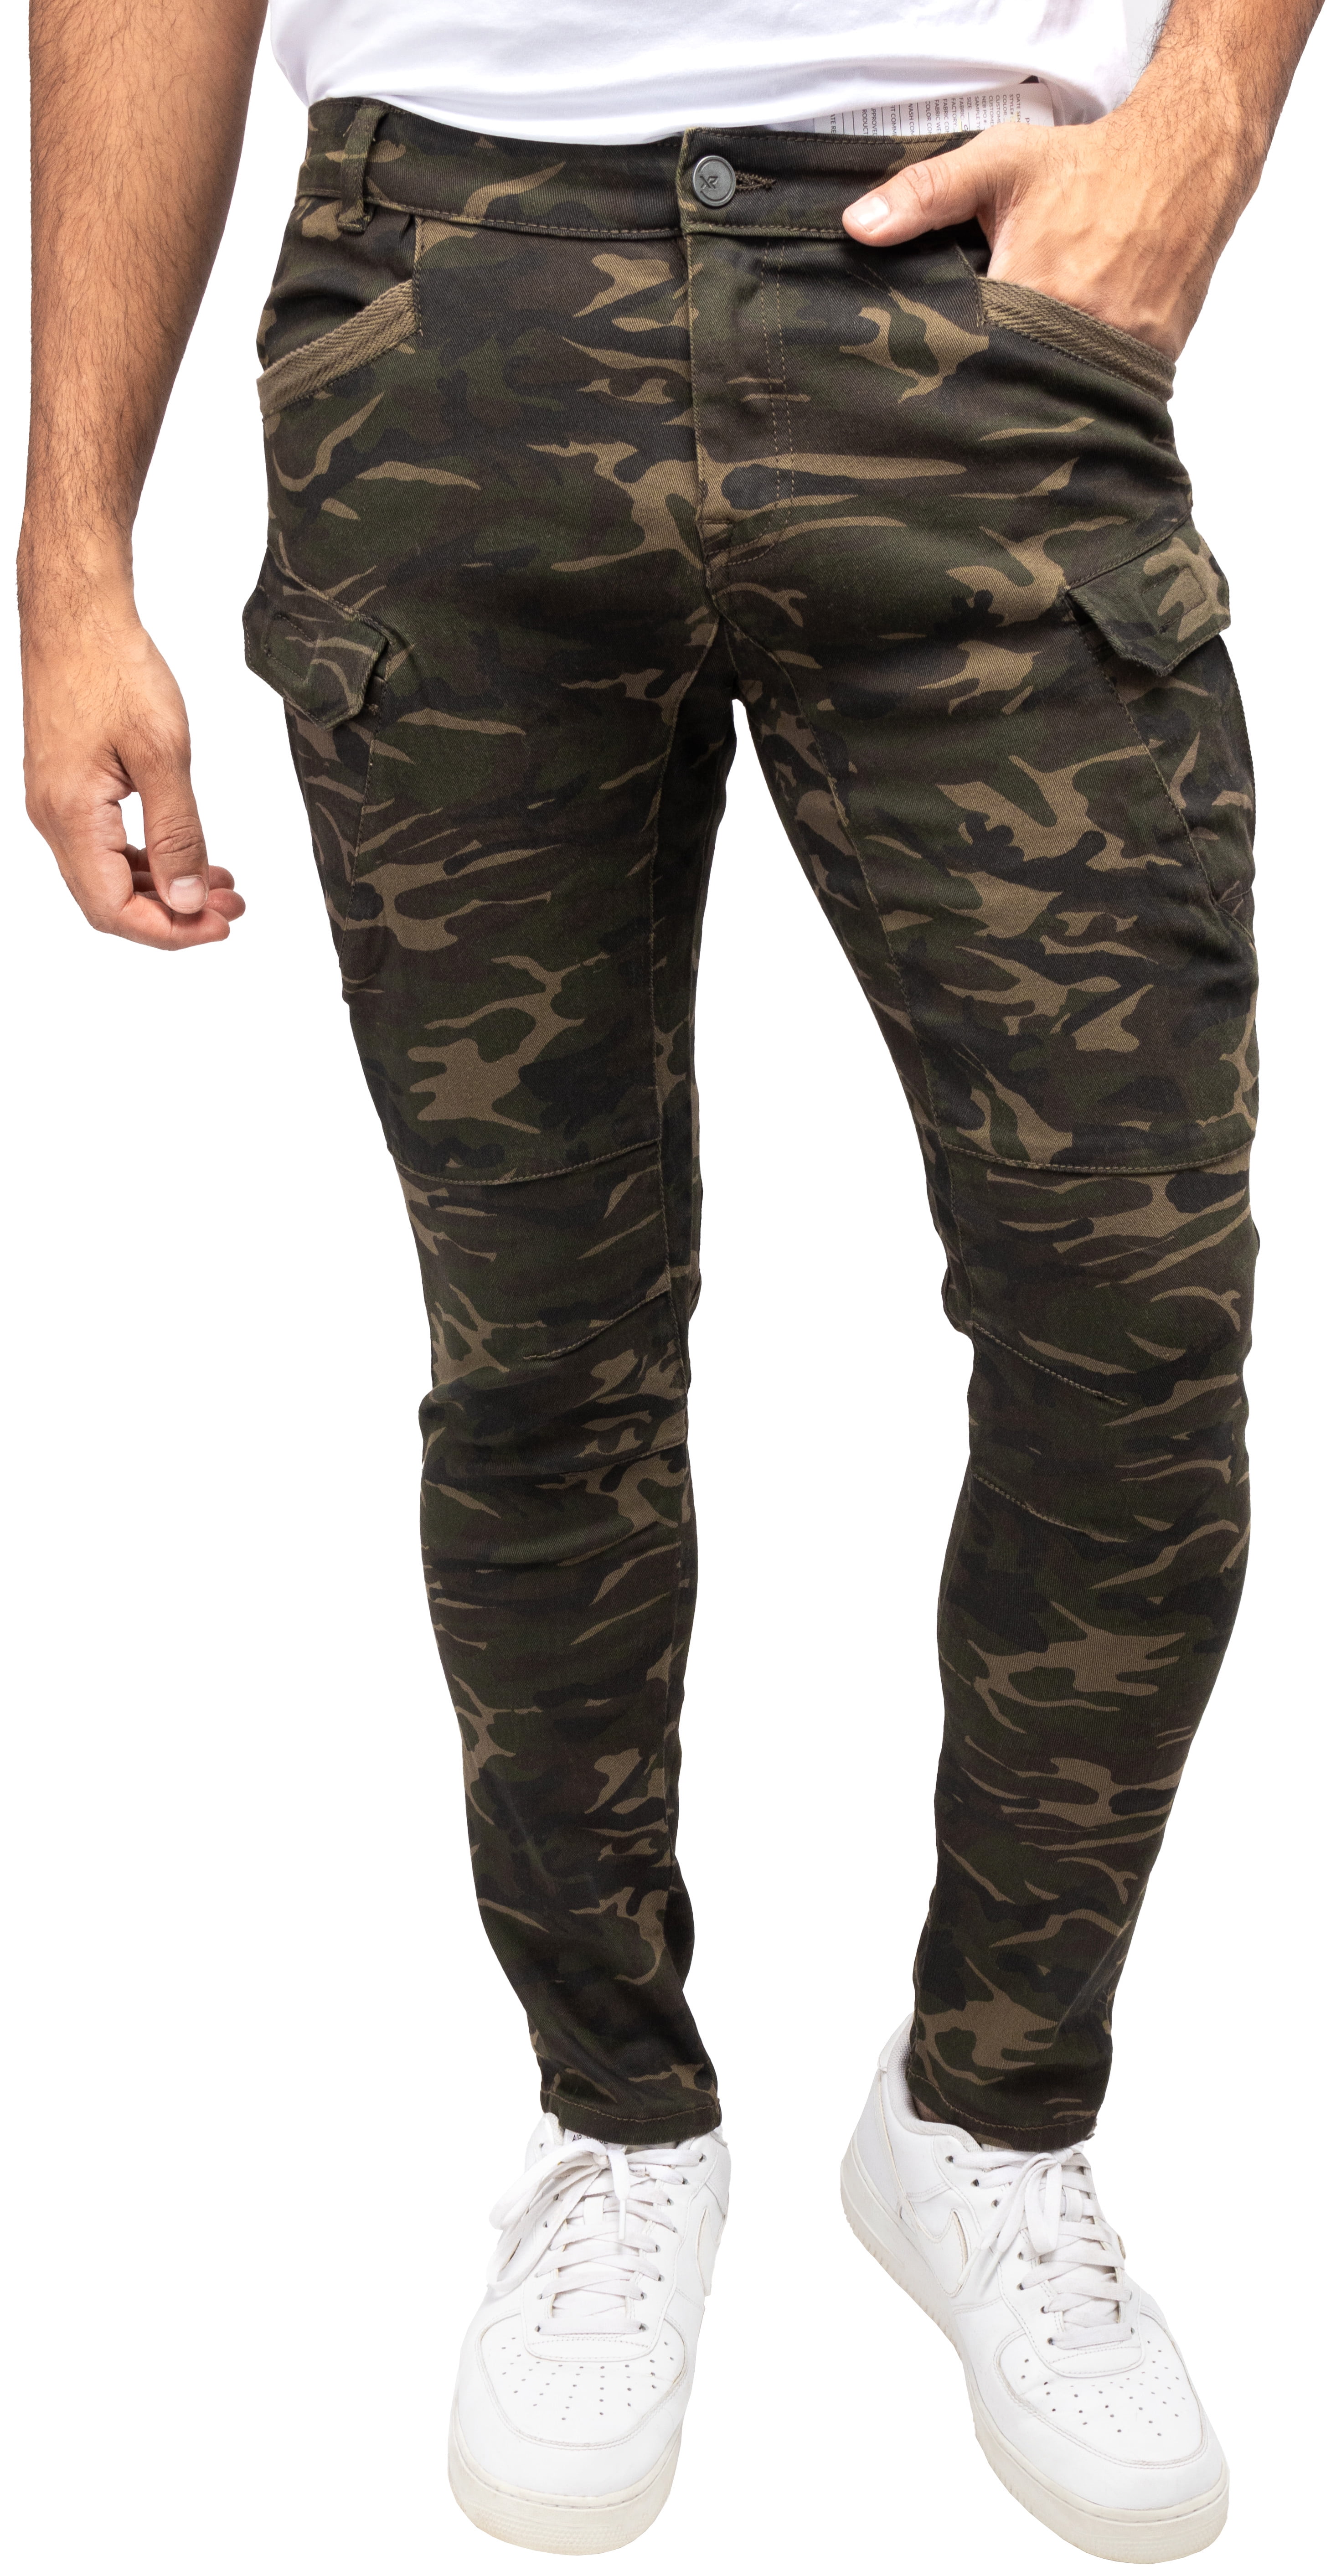 Men's Casual Cargo Pants Slim Fit Skinny Stretch Camo Pants Fashion Comfort  Outdoor Hiking Jeans Trousers with Multi Pockets 